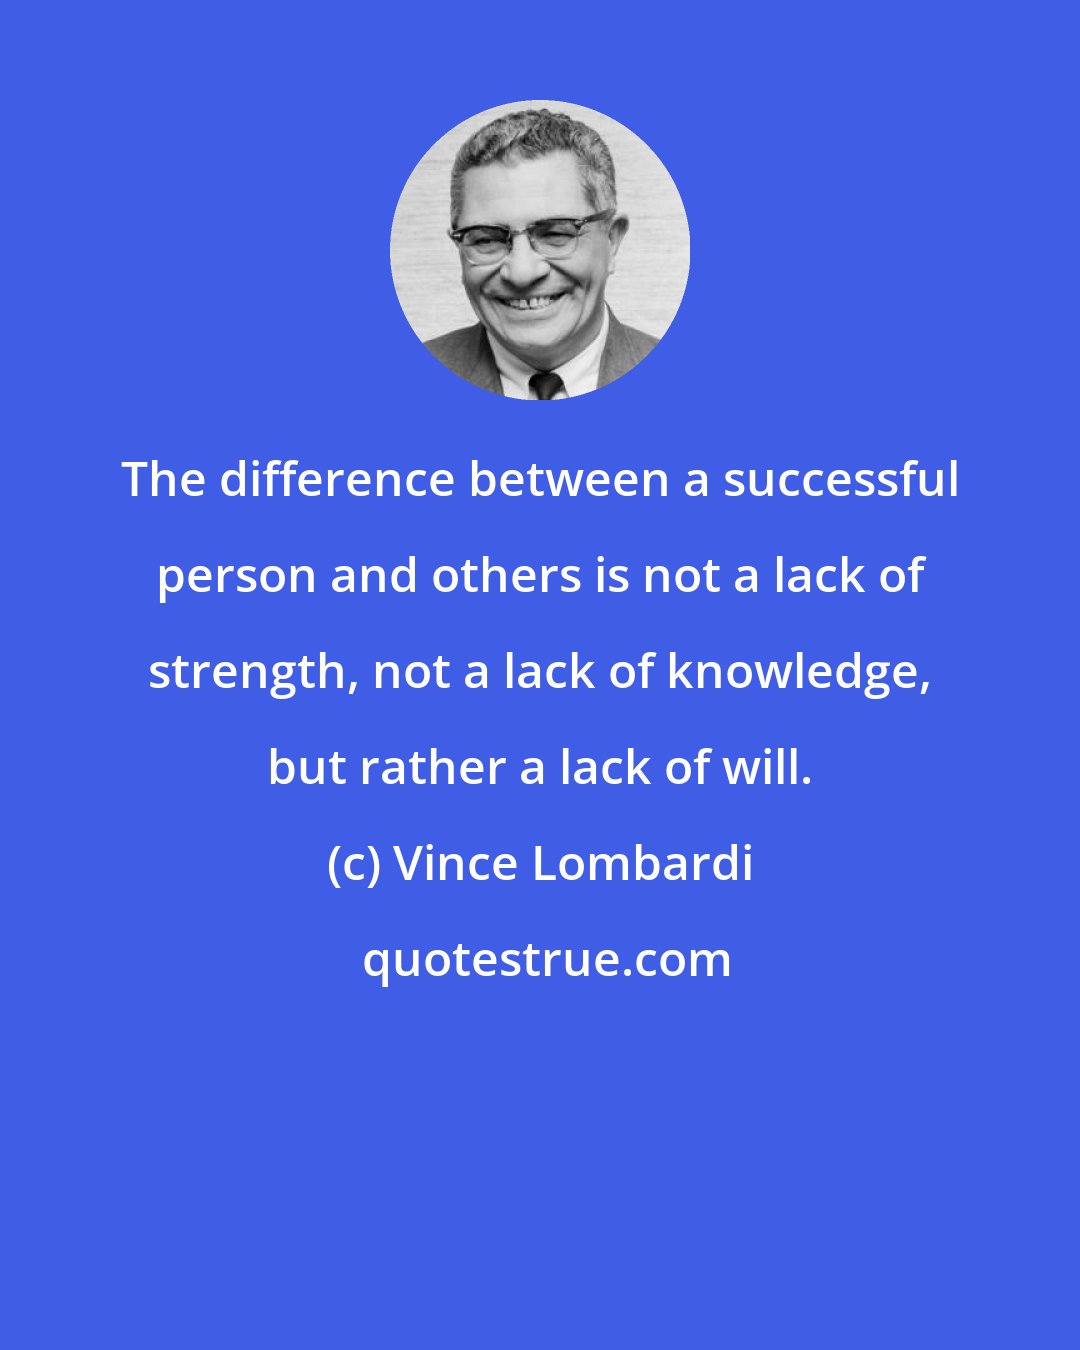 Vince Lombardi: The difference between a successful person and others is not a lack of strength, not a lack of knowledge, but rather a lack of will.